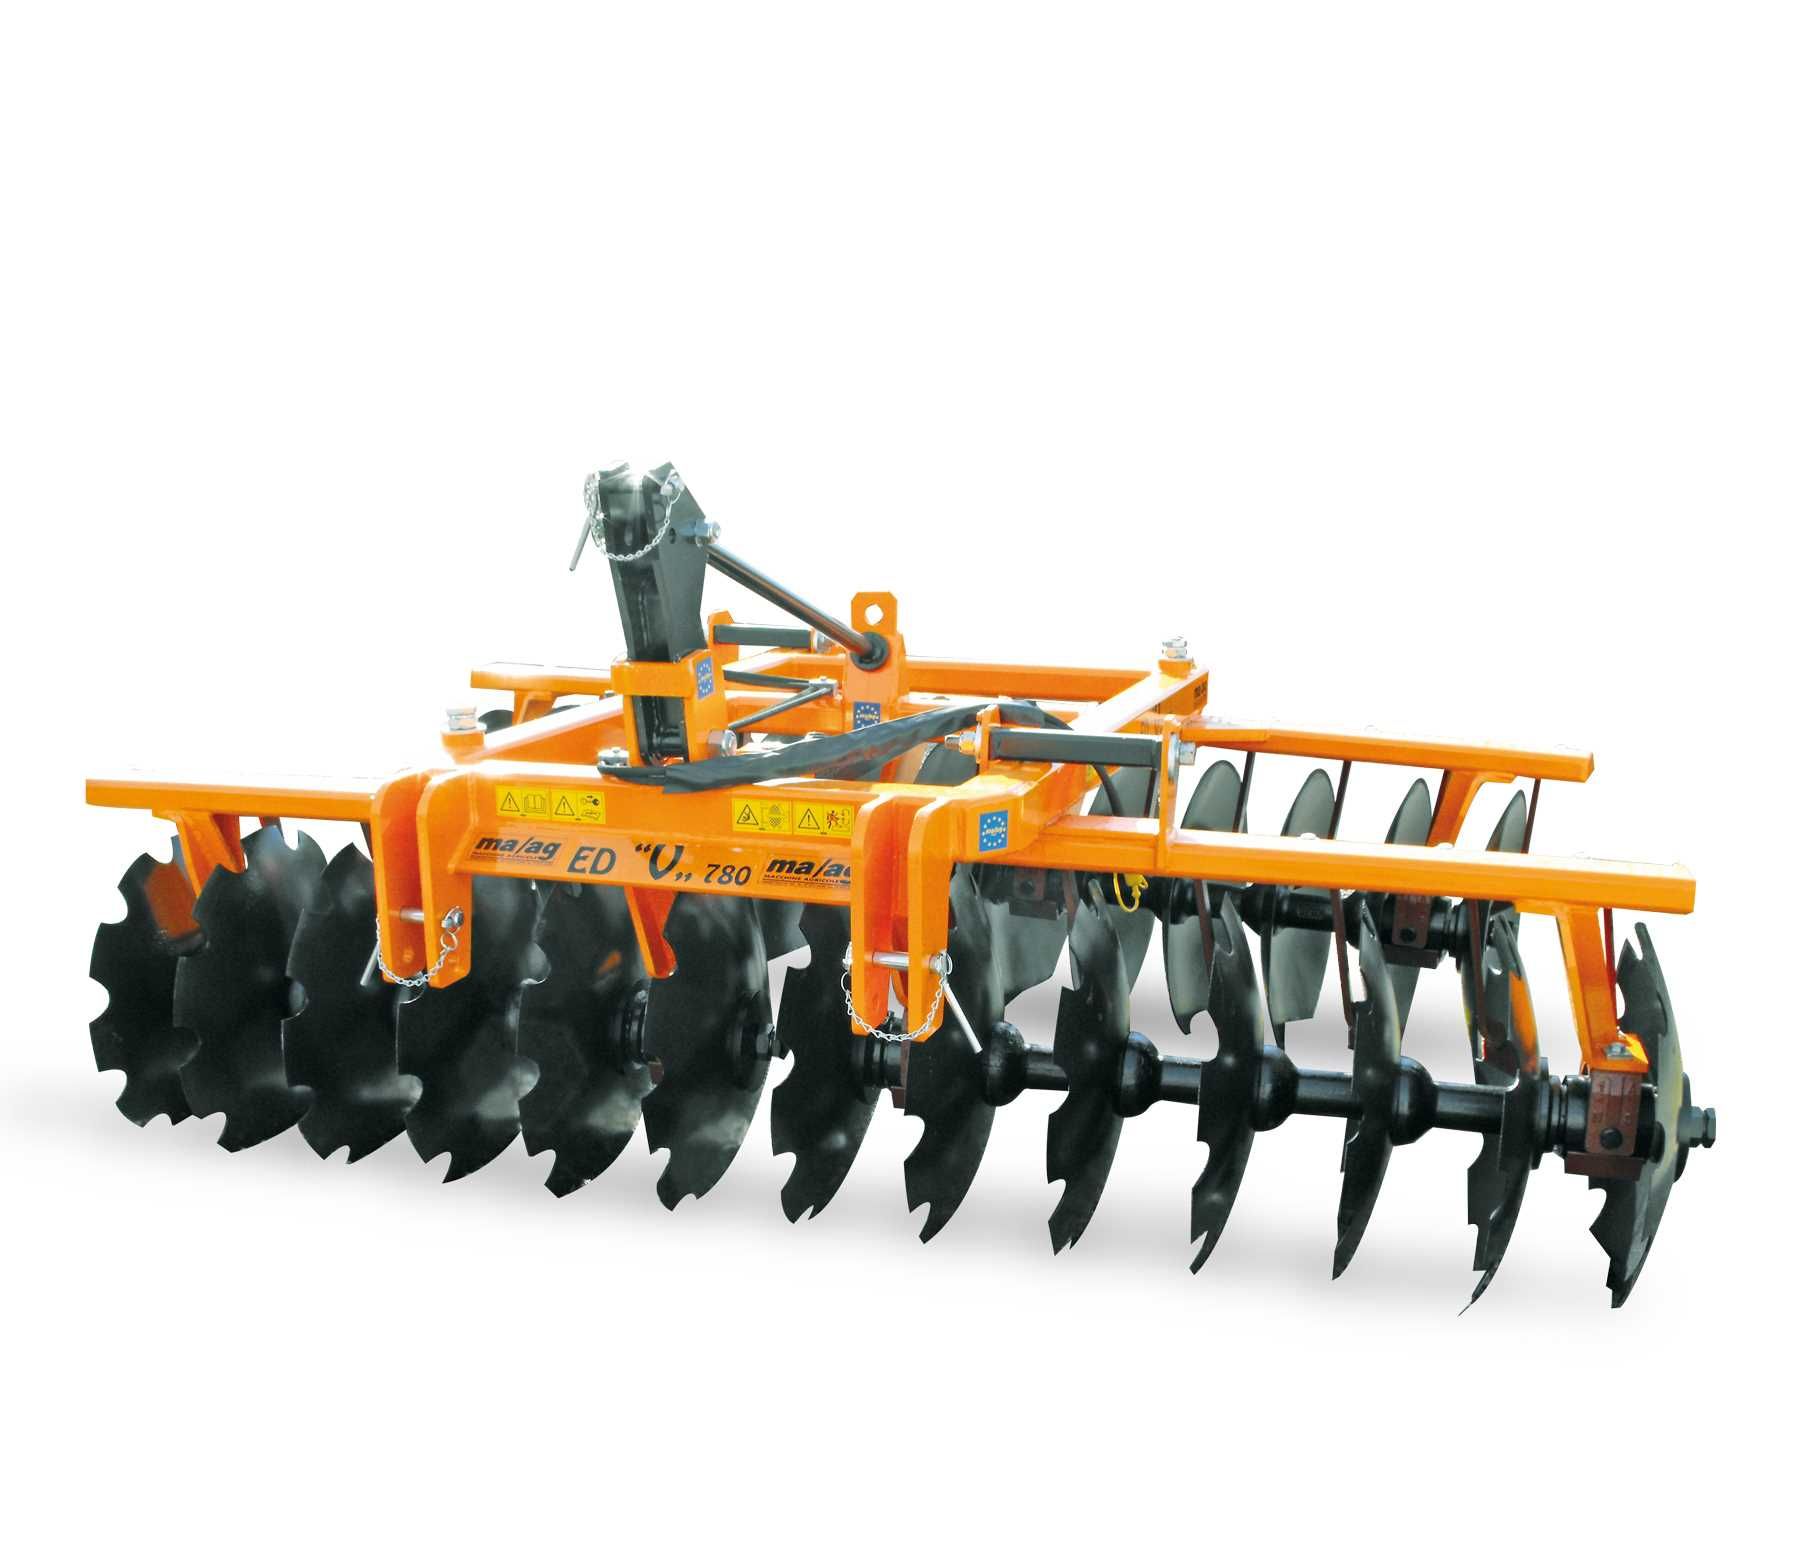 Disc harrows with “V” sections